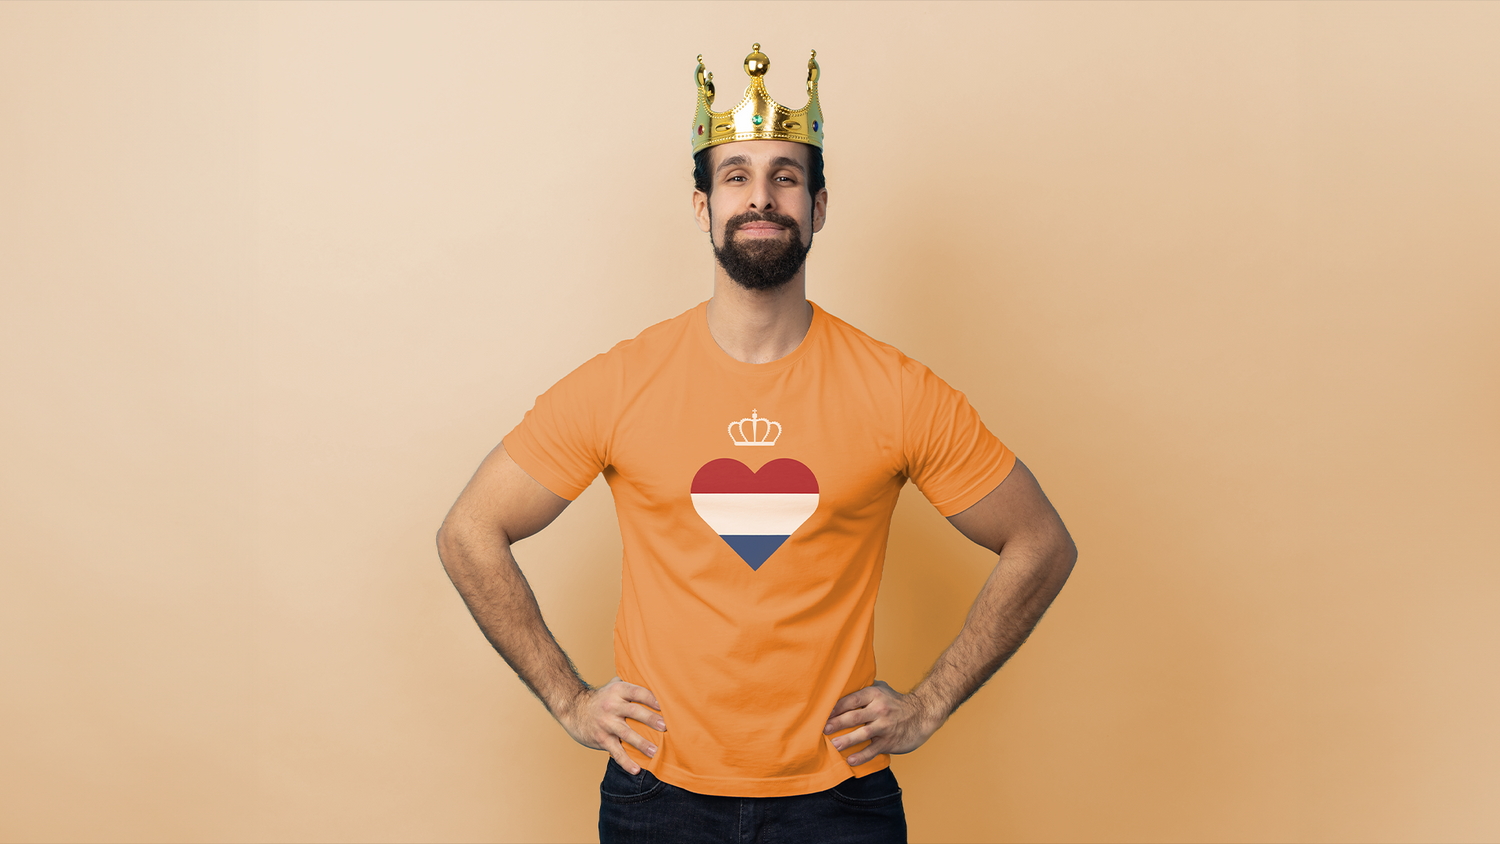 King's Day clothing